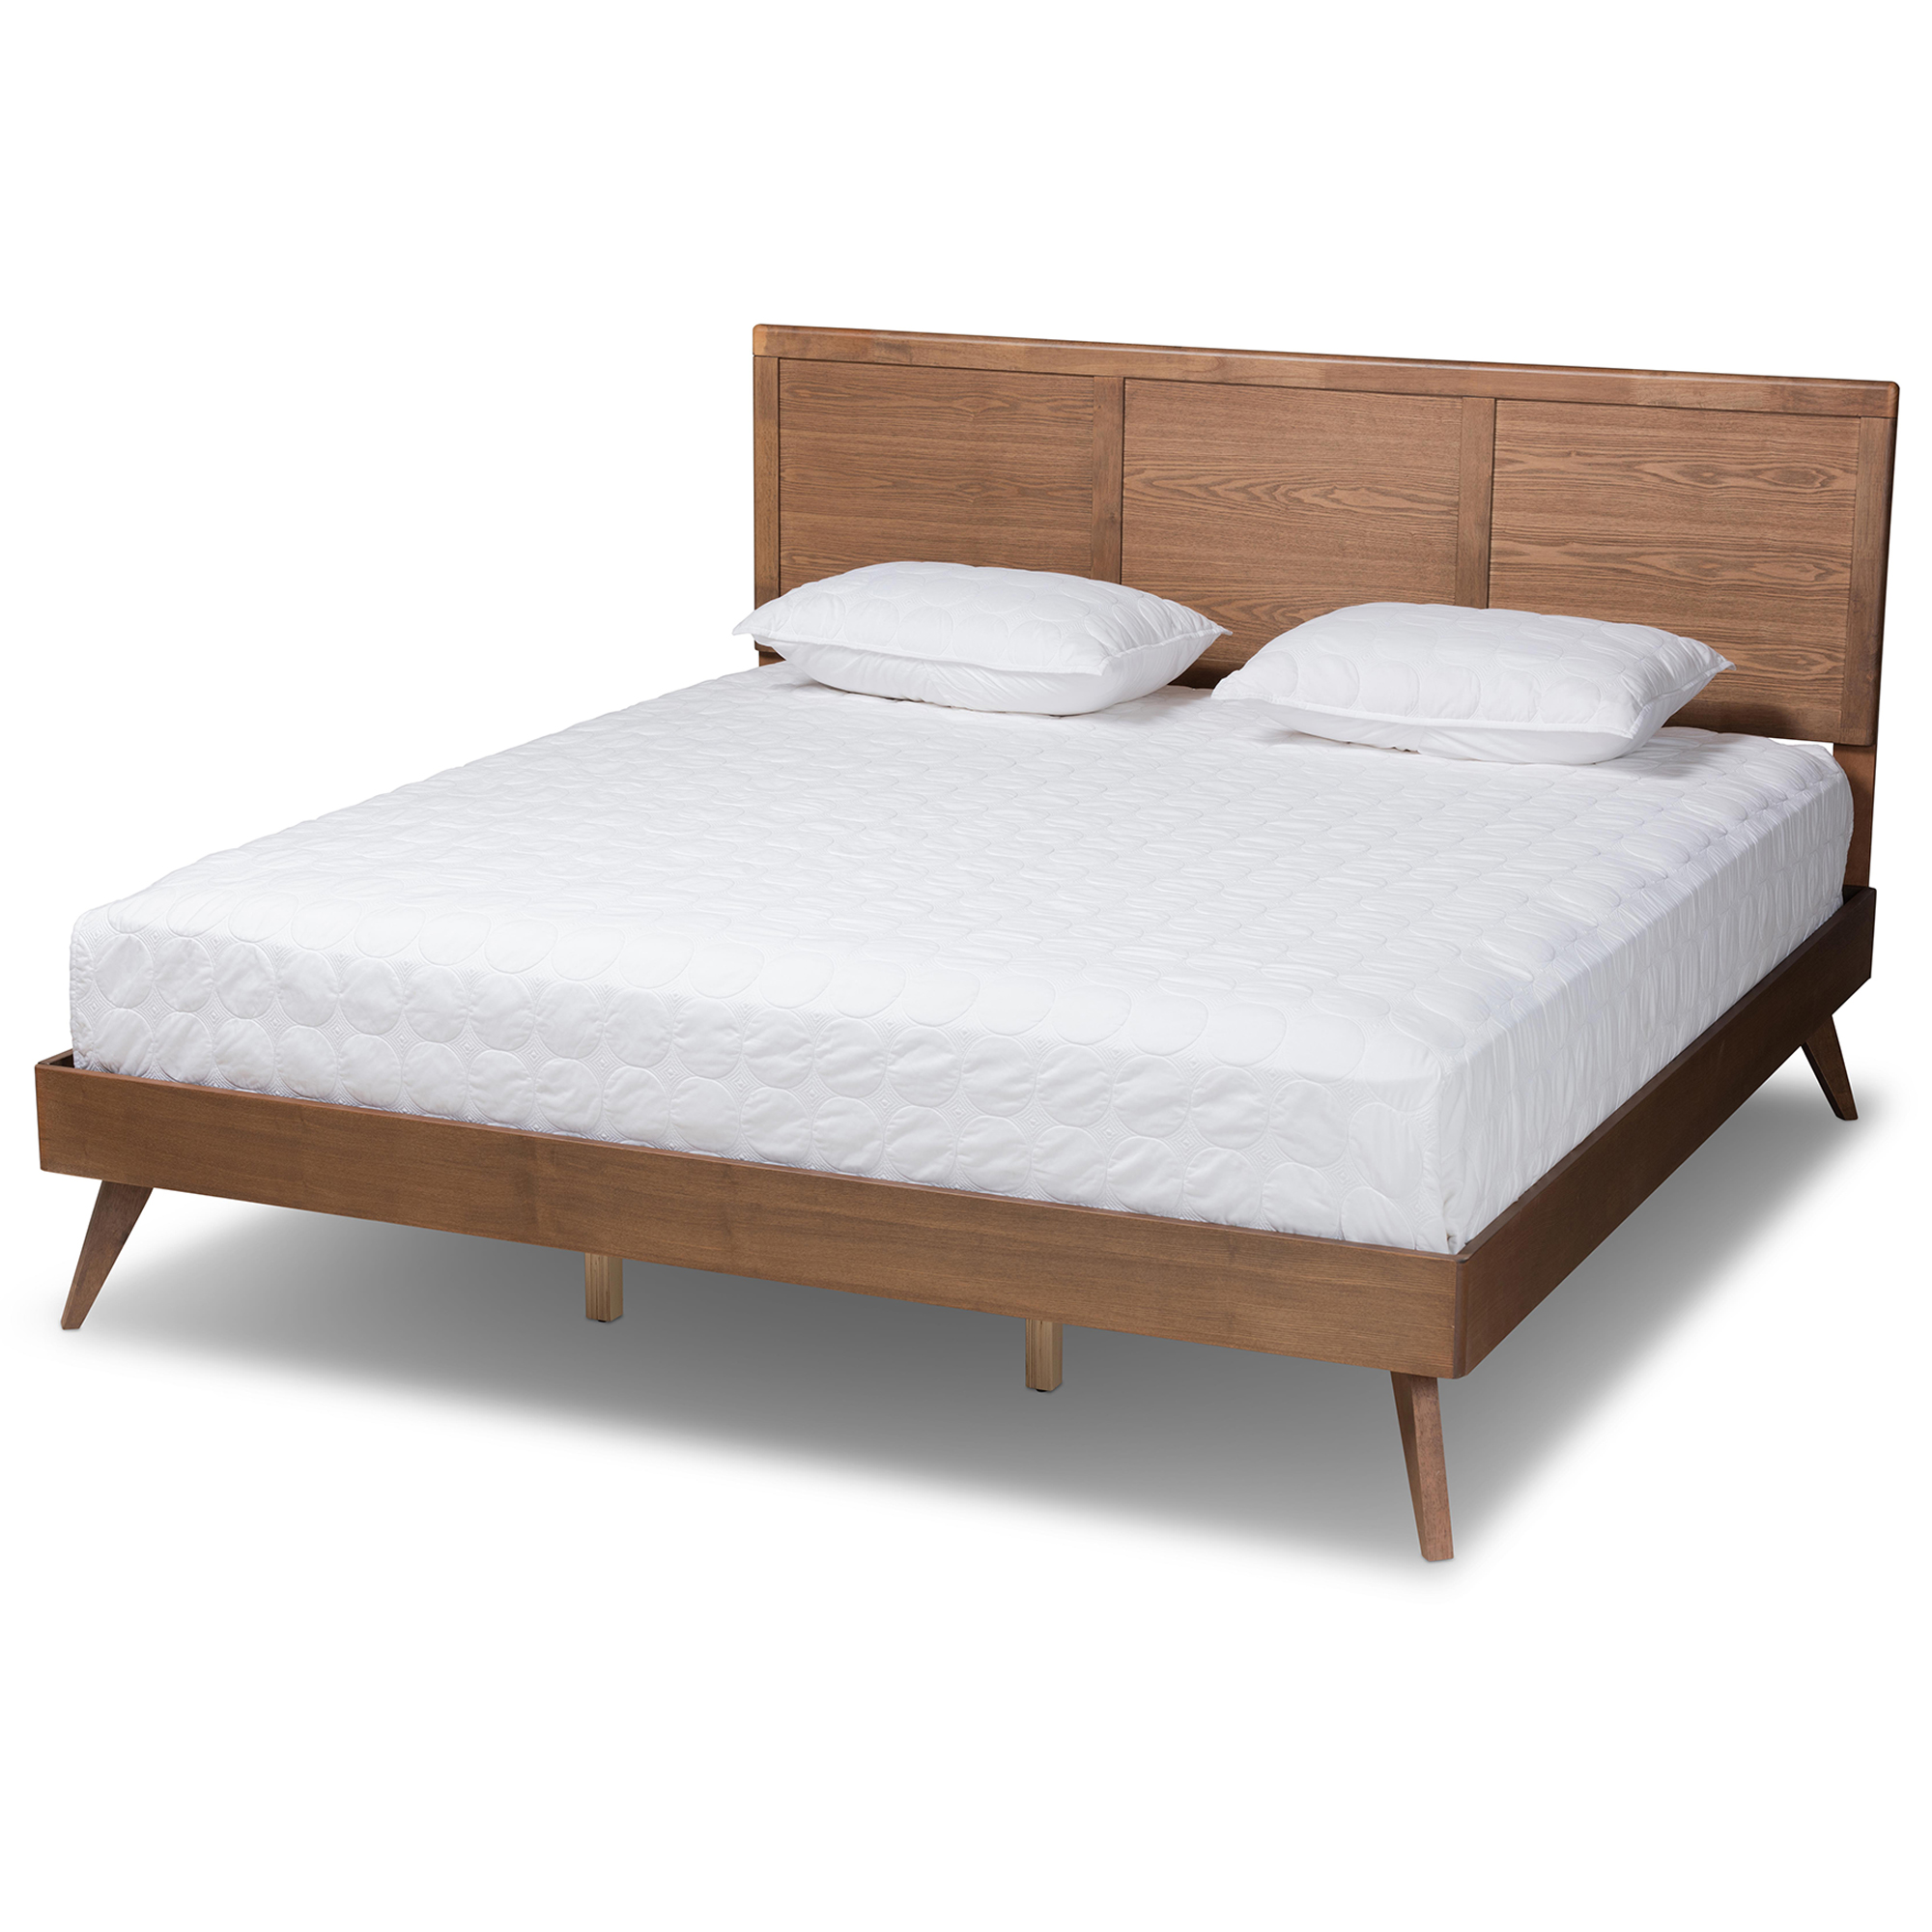 Baxton Studio Zenon Mid-Century Modern Walnut Brown Finished Wood King Size Platform Bed Affordable modern furniture in Chicago, classic bedroom furniture, modern king size, cheap king size